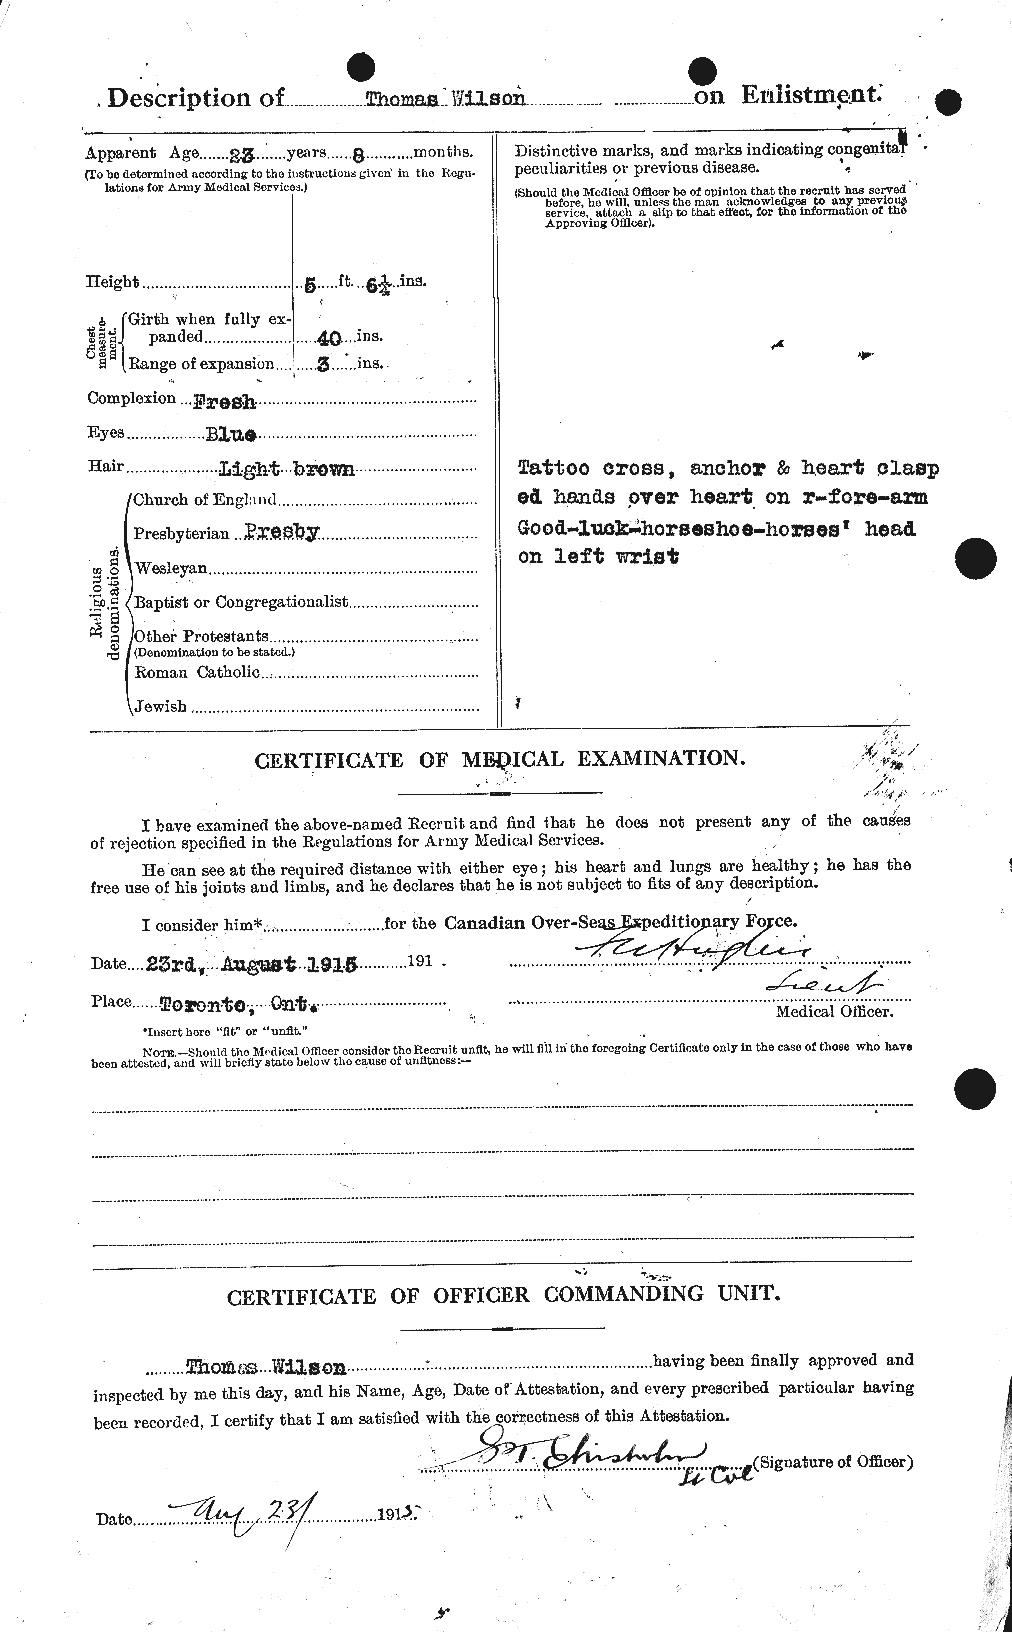 Personnel Records of the First World War - CEF 681184b